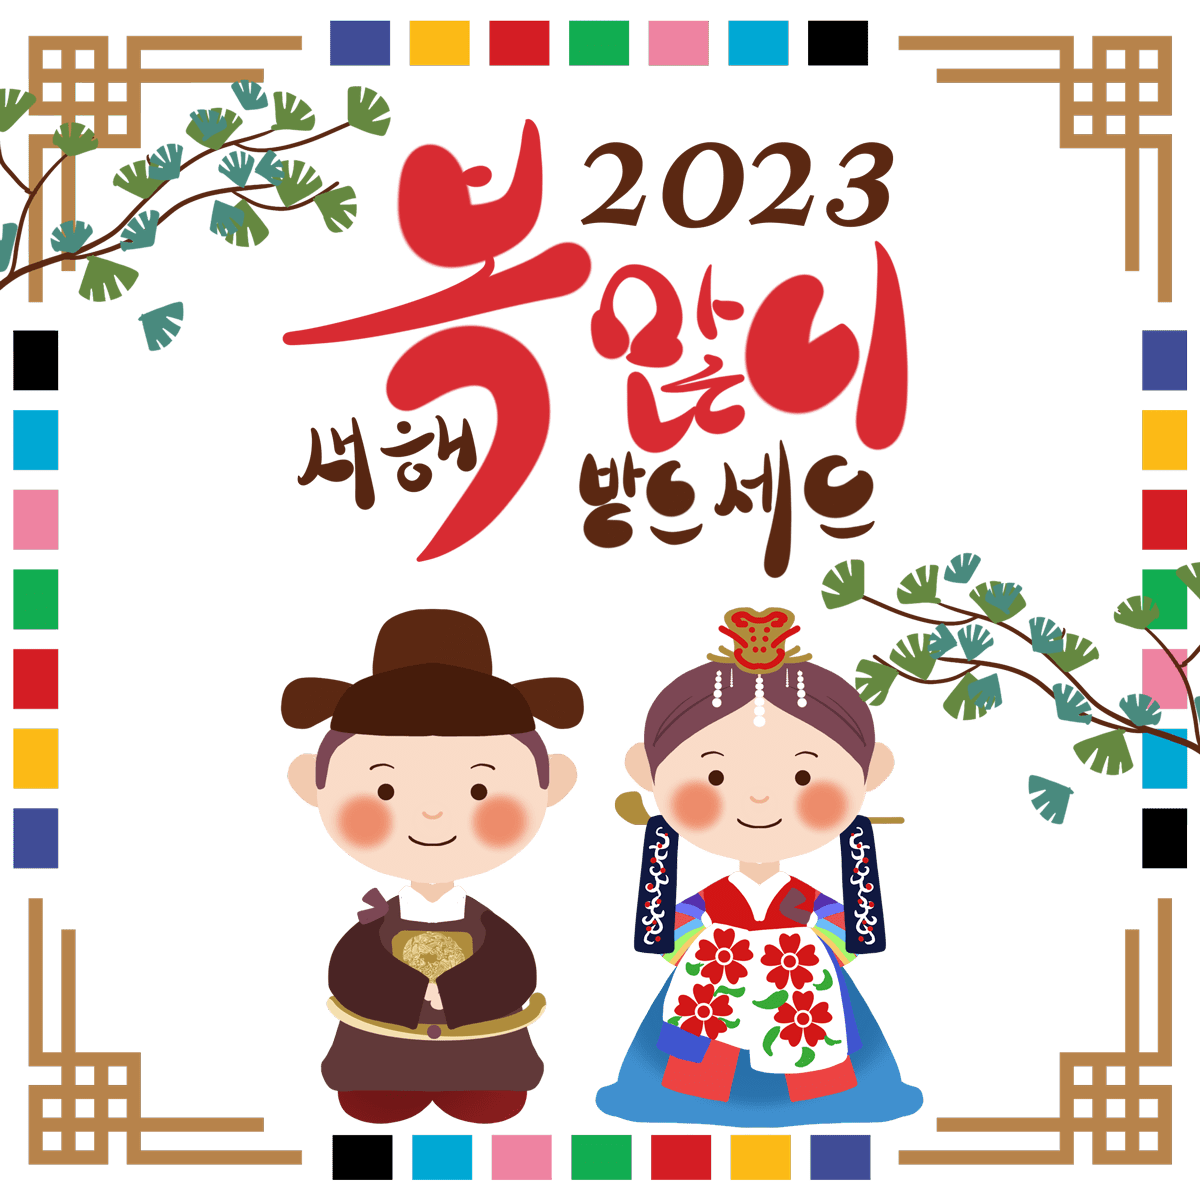 —Pngtree—happy new year 2023 in_8736047.png